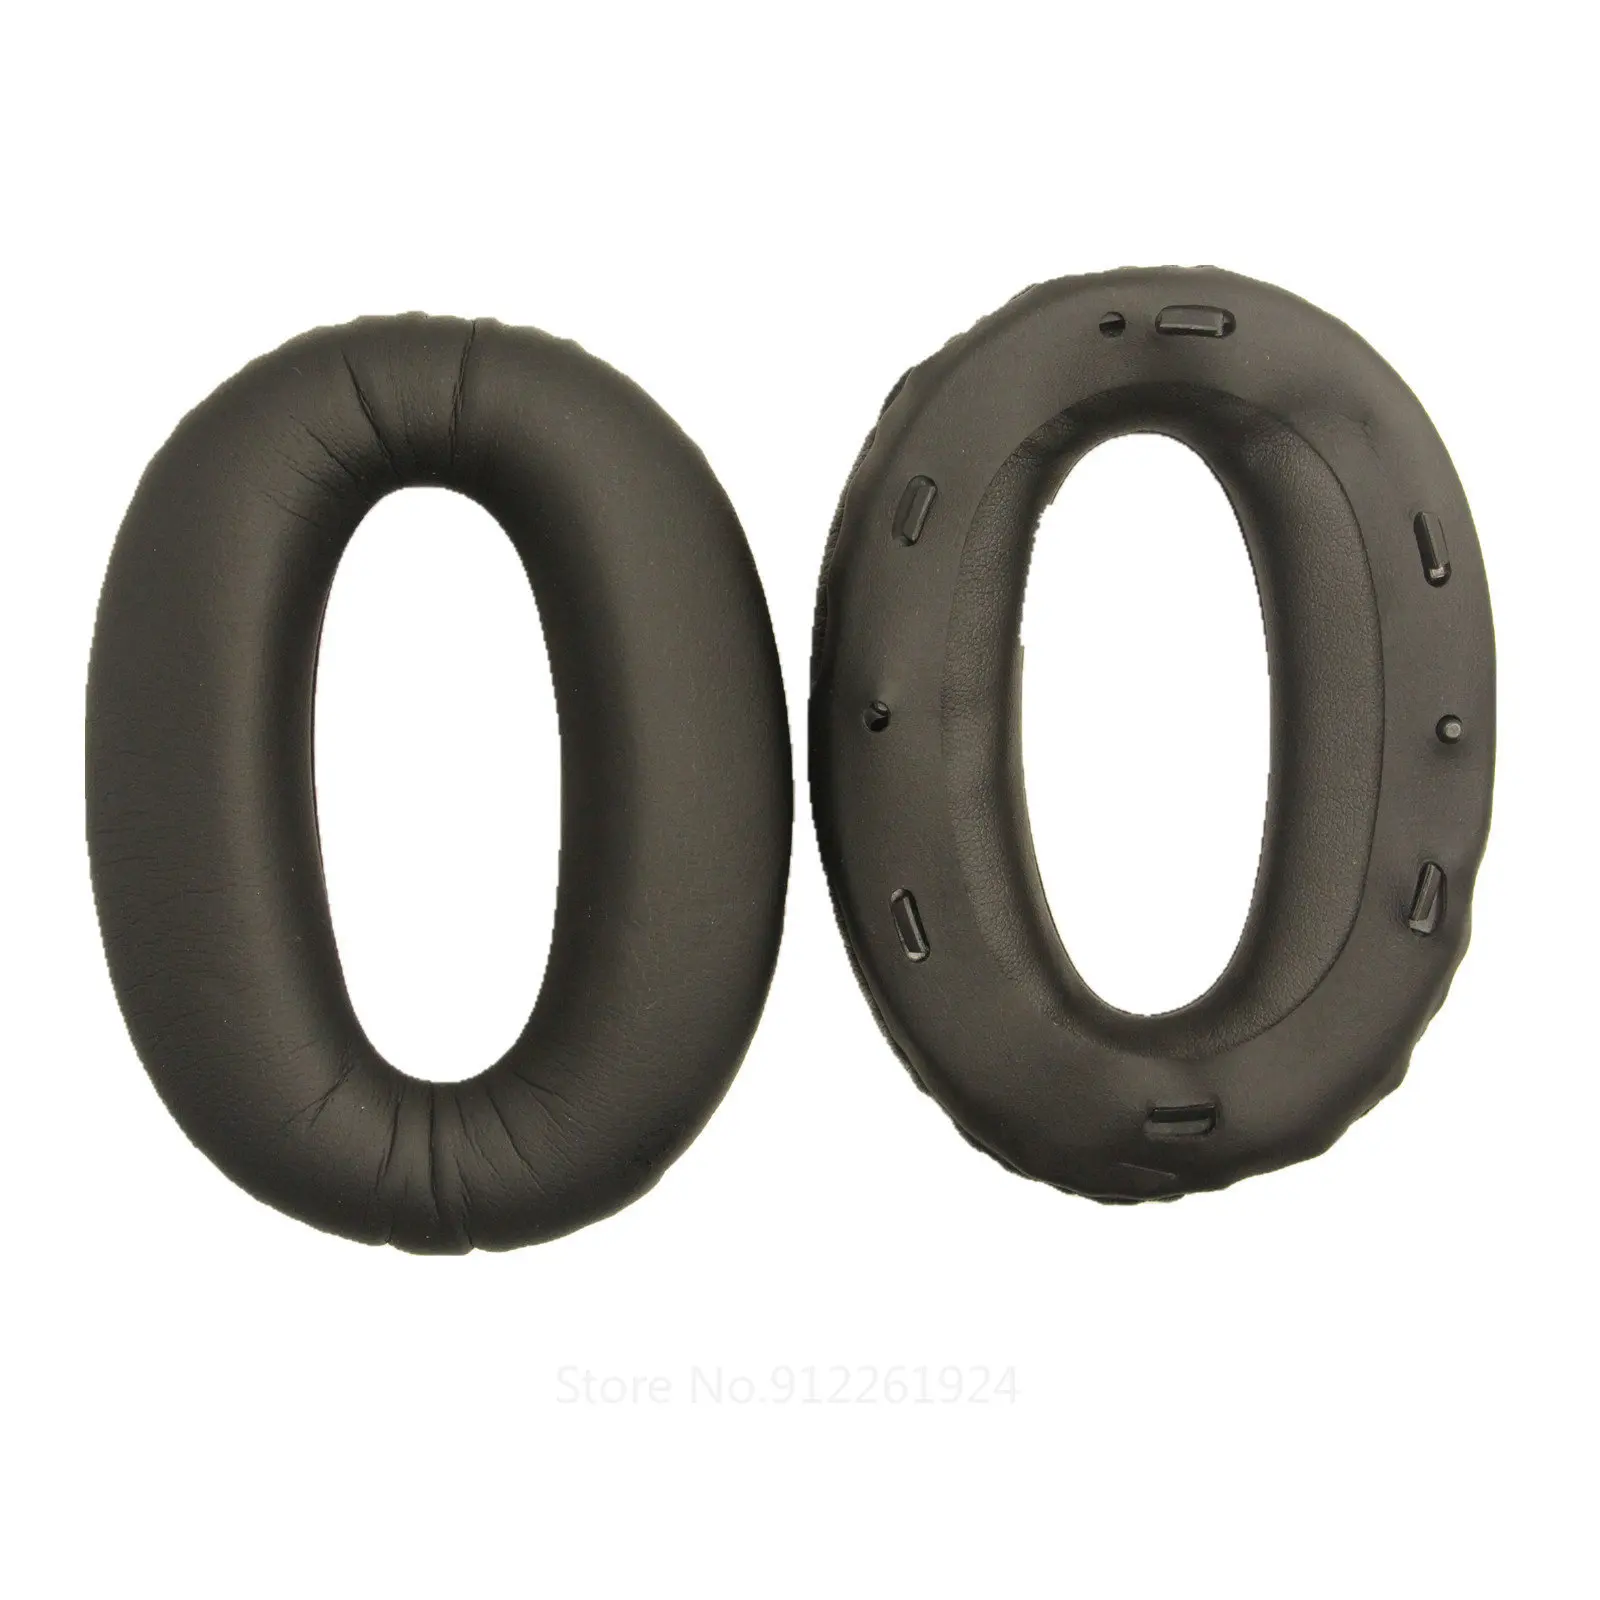 

Replacement Earpads For SONY MDR-1000X MDR 1000X WH-1000XM2 Headphones Ear Pads Soft Protein Leather Memory Foam Soft Leather